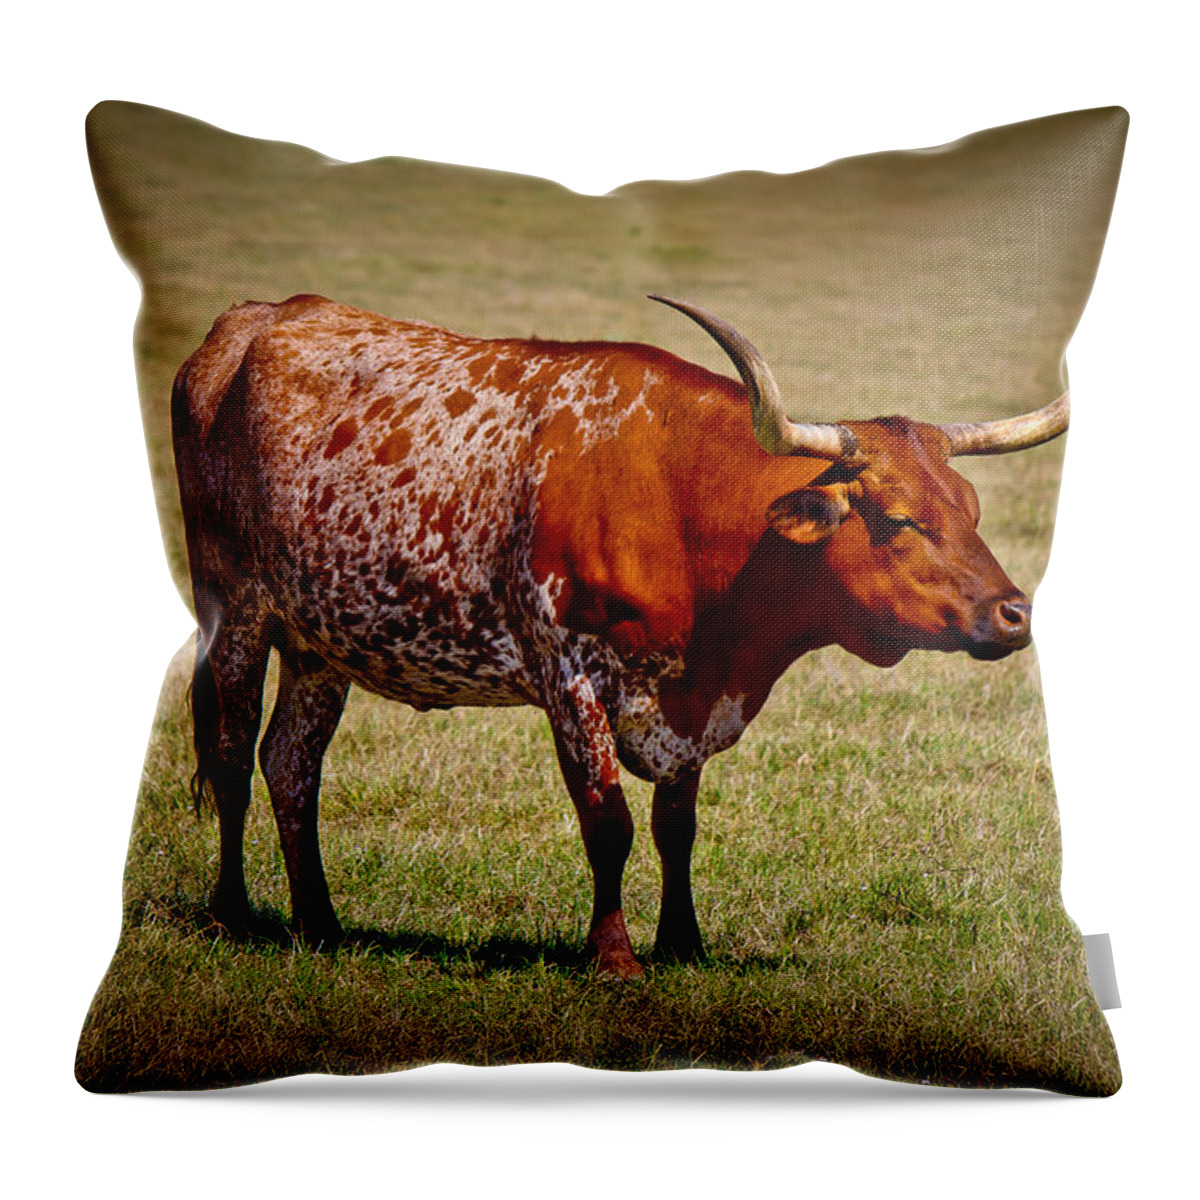 Afternoon Throw Pillow featuring the photograph One Lone Longhorn by Doug Long